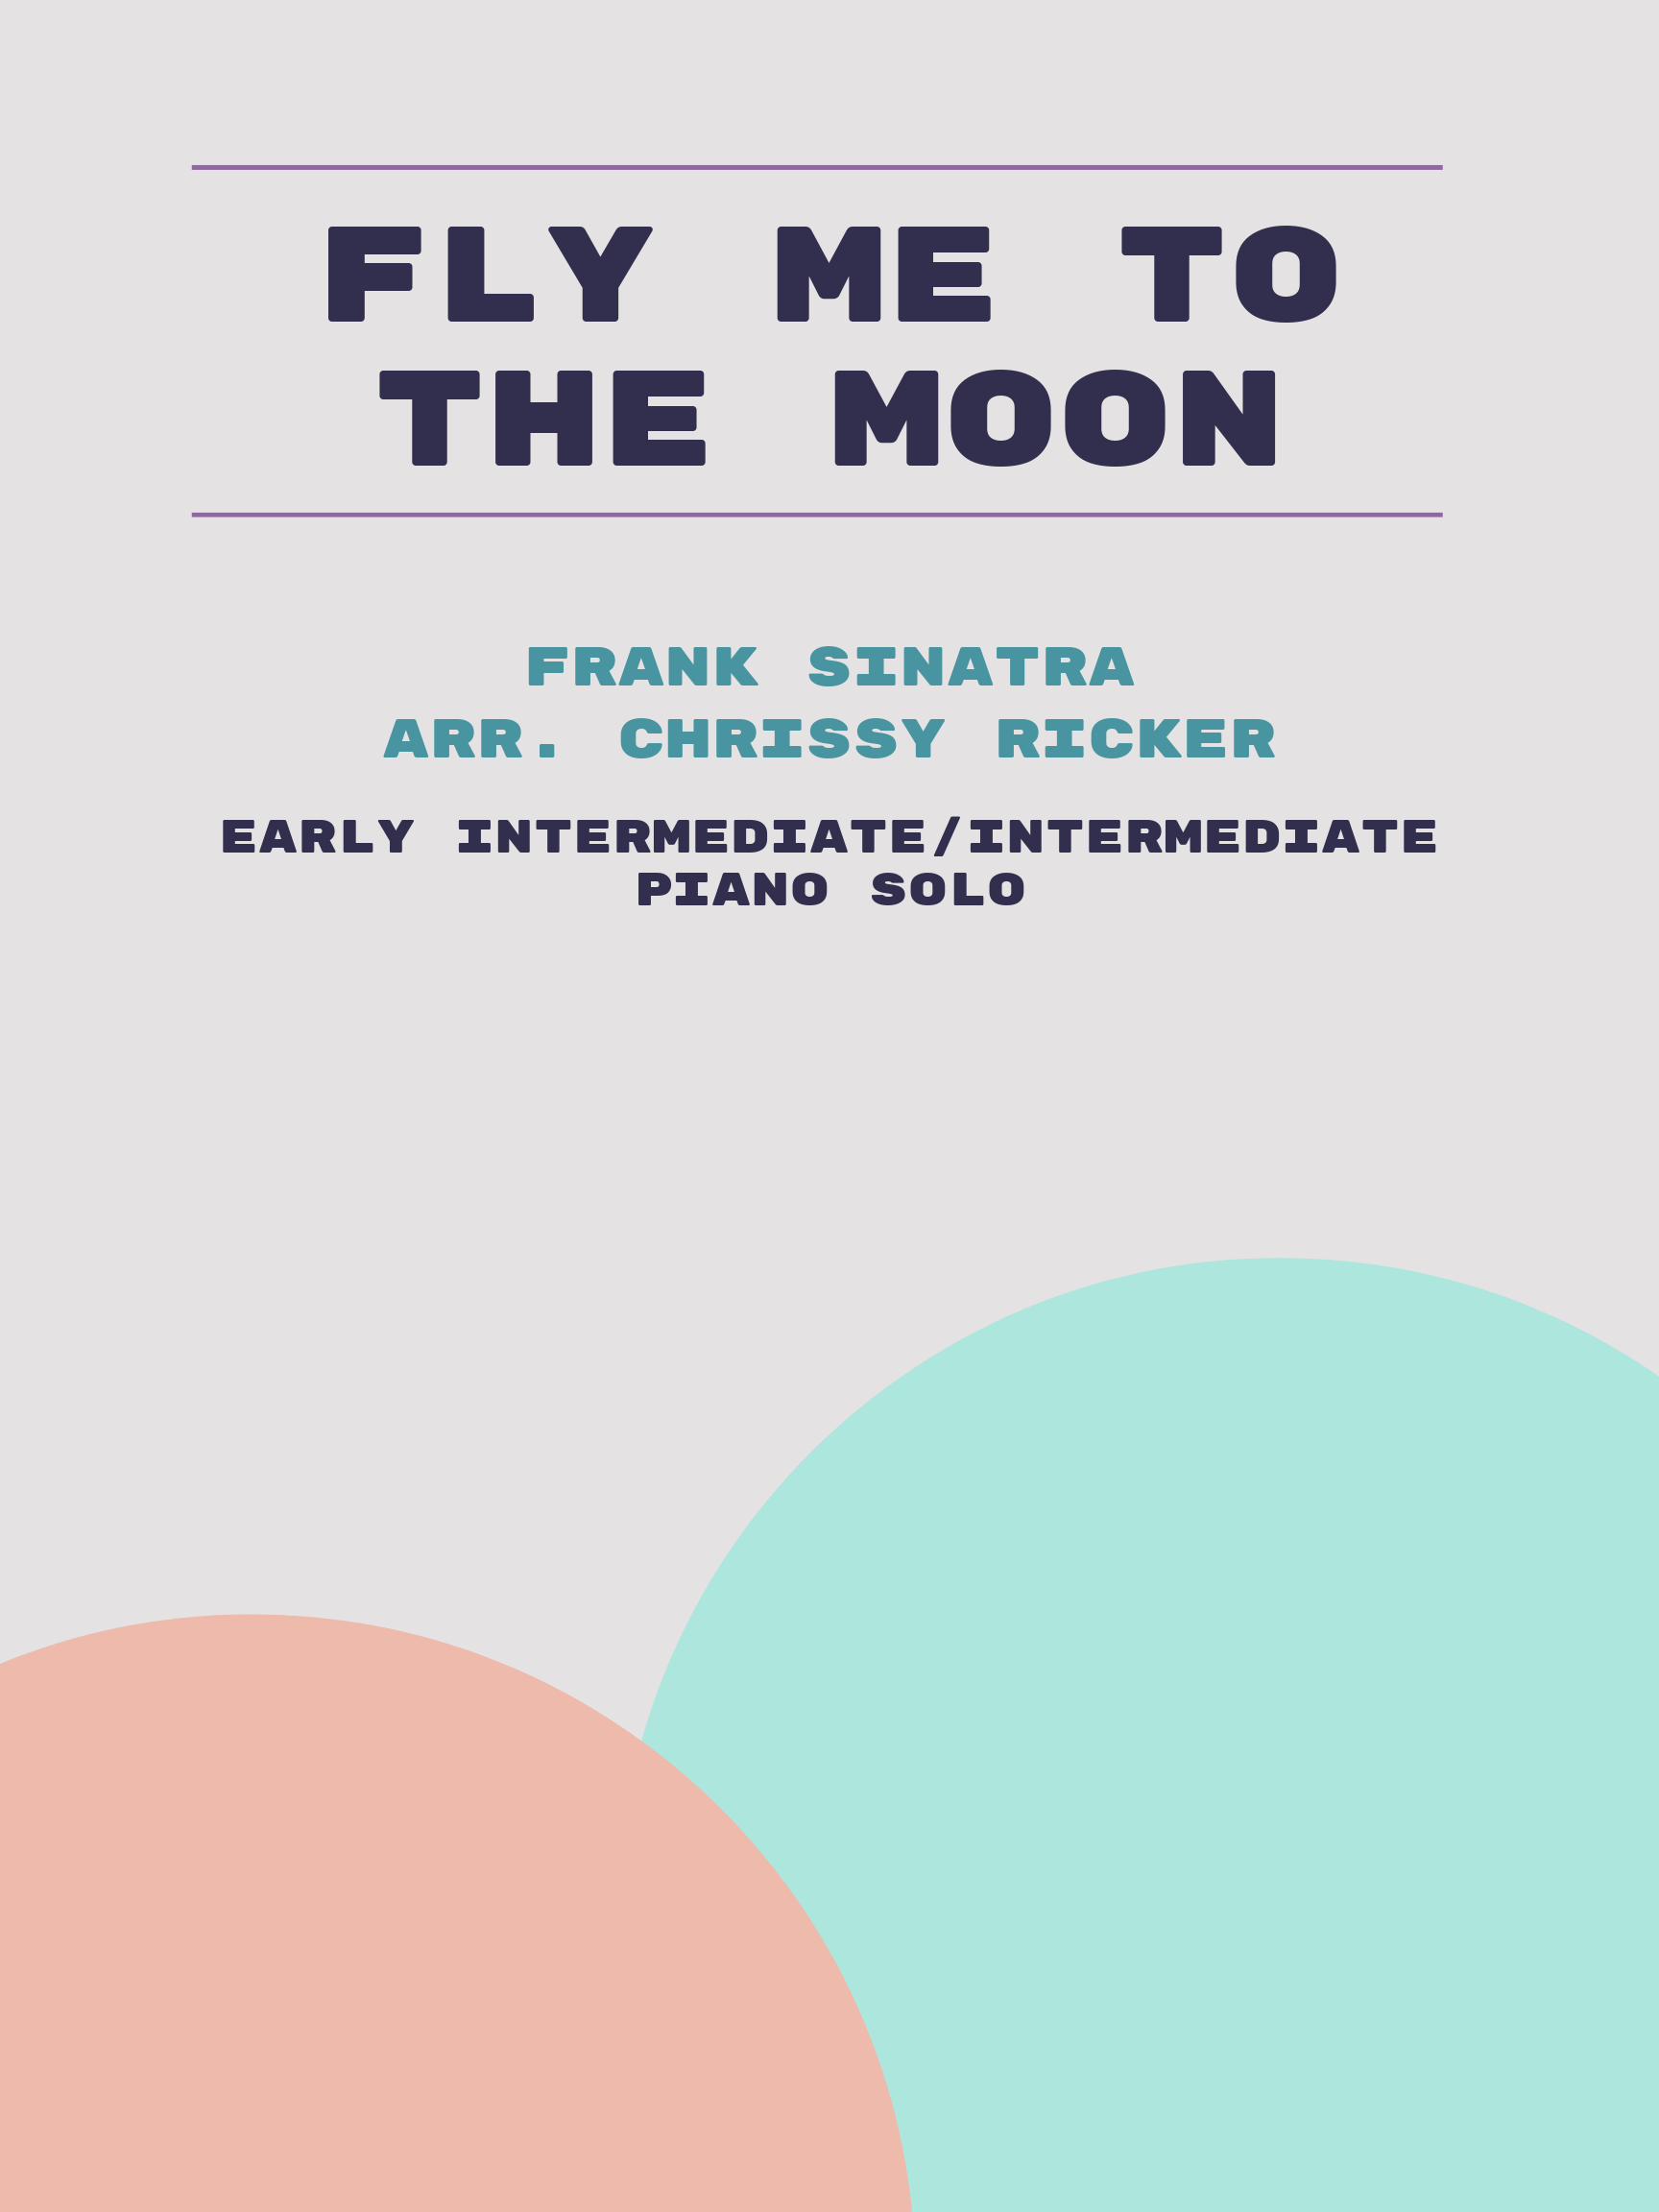 Fly Me to the Moon by Frank Sinatra